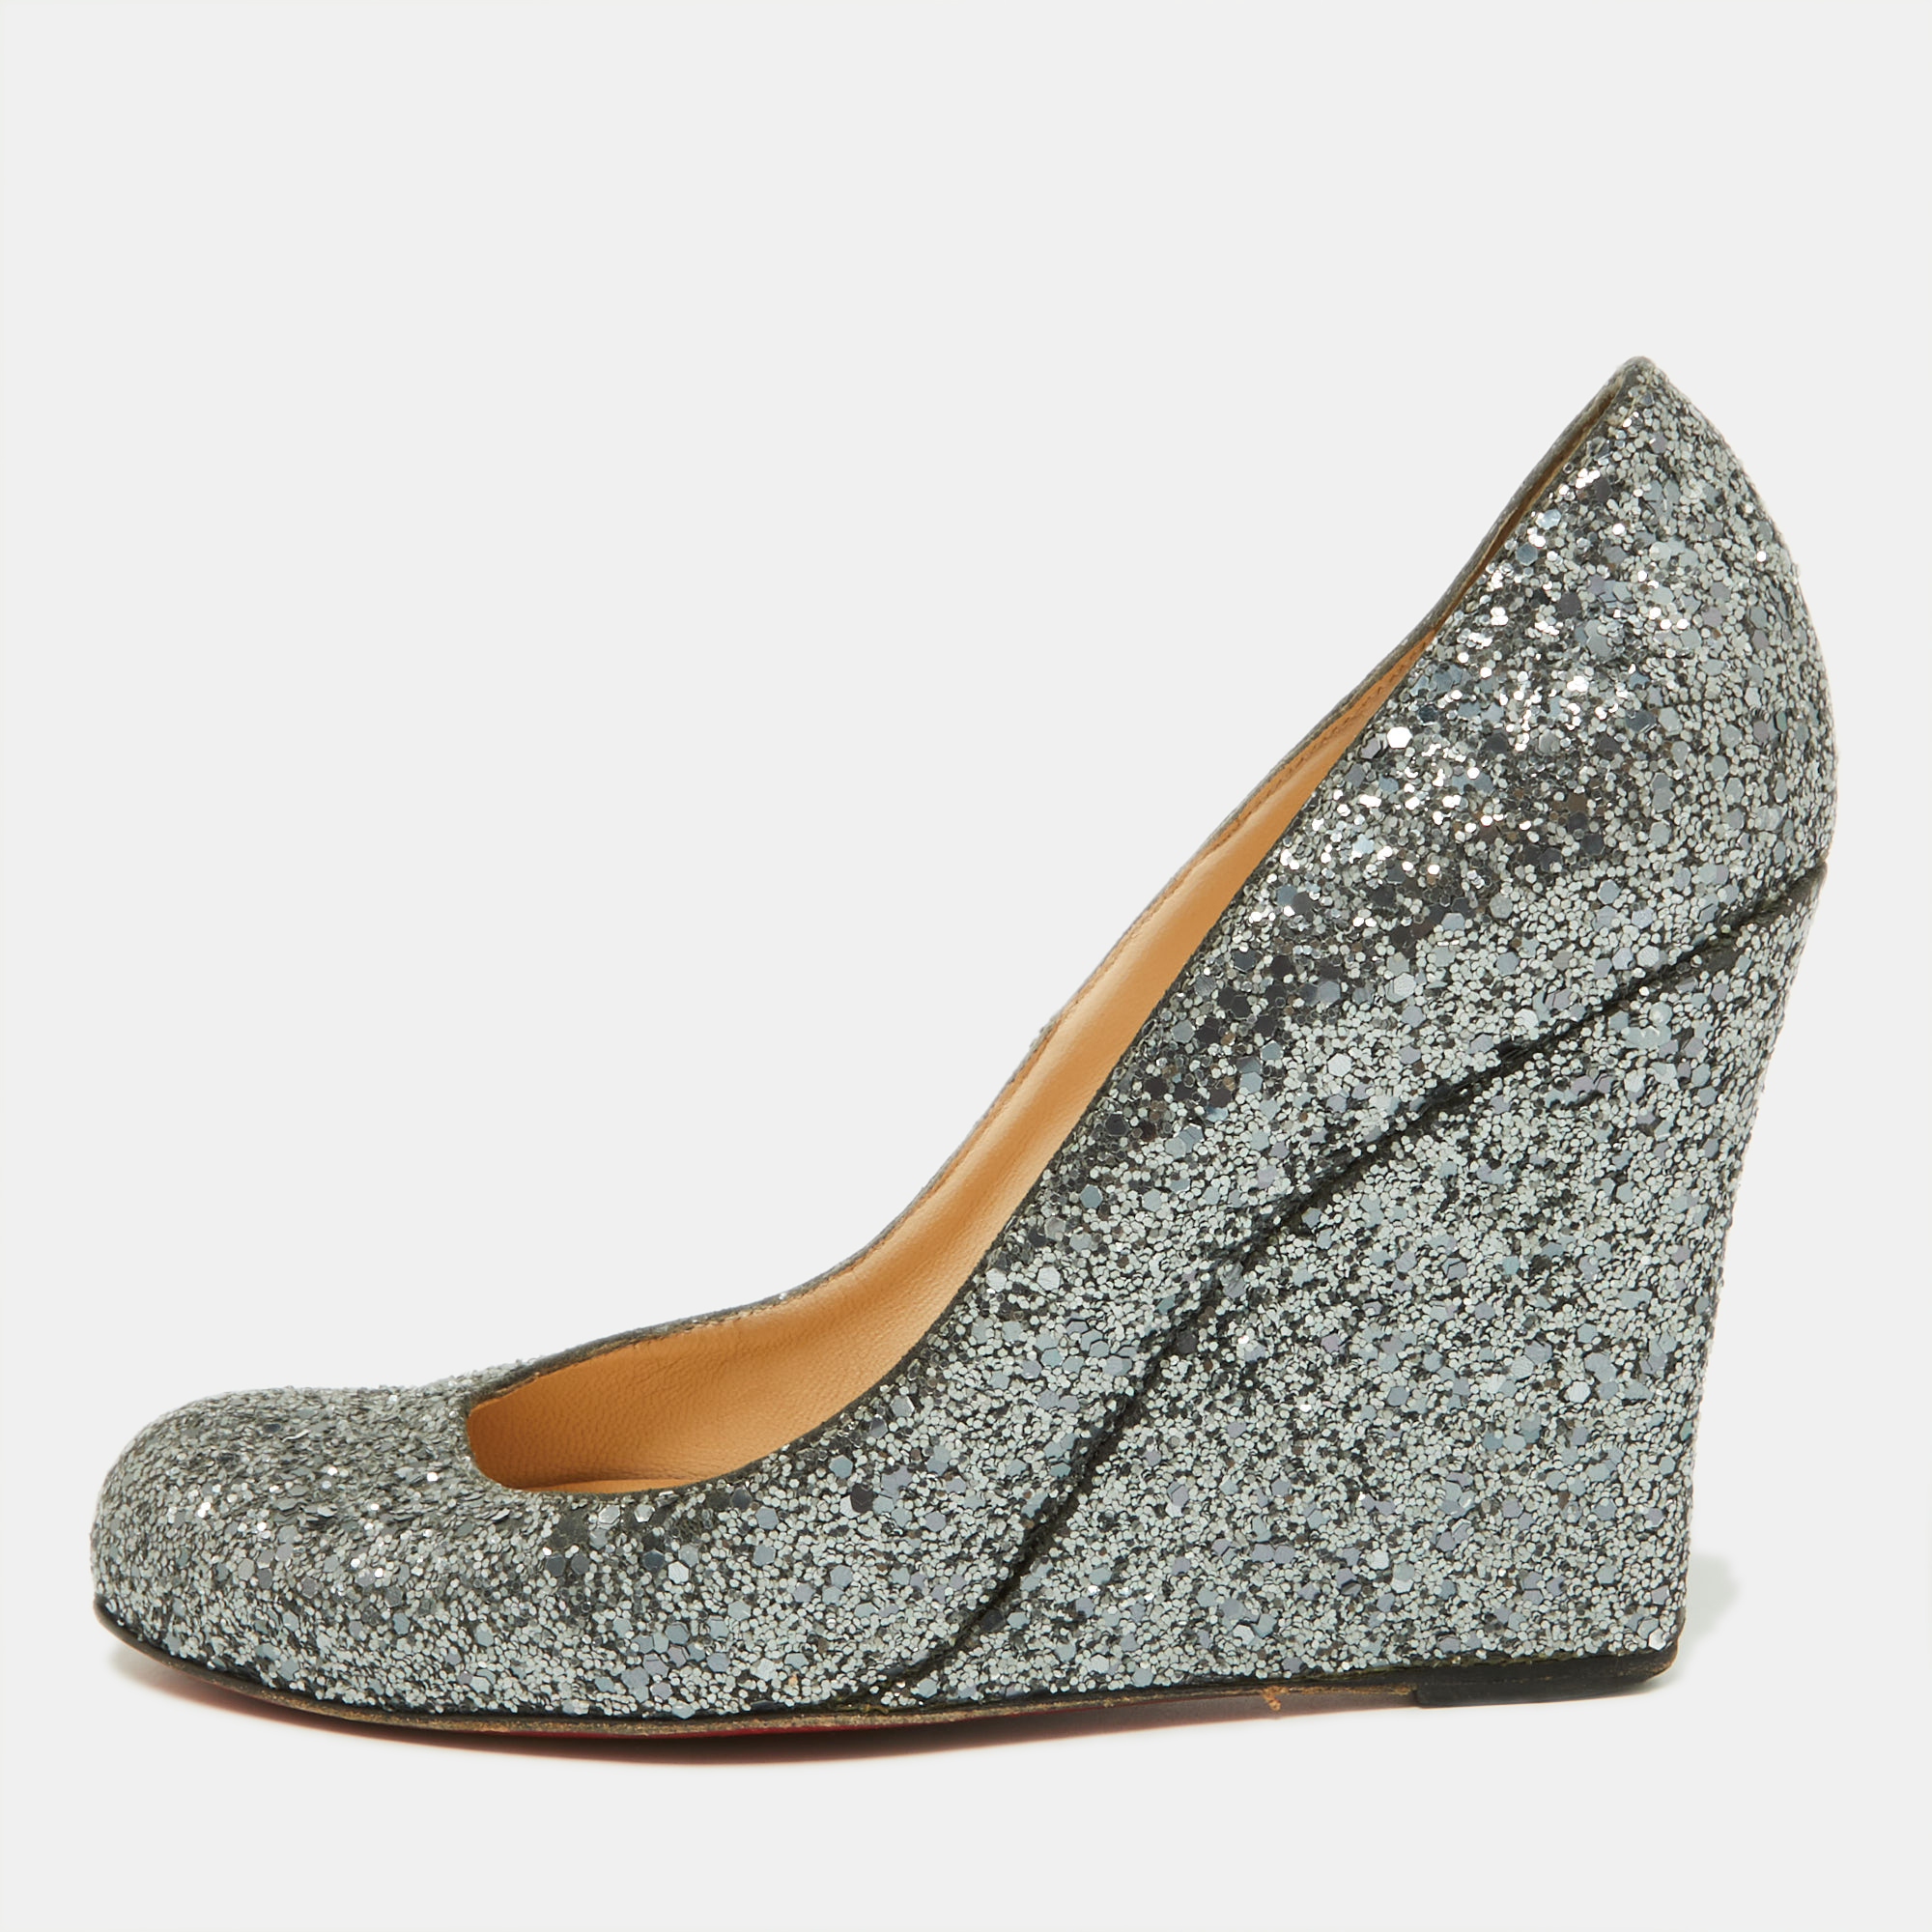 Pre-owned Christian Louboutin Metallic Grey Coarse Glitter Miss Boxe Wedge Pumps Size 38